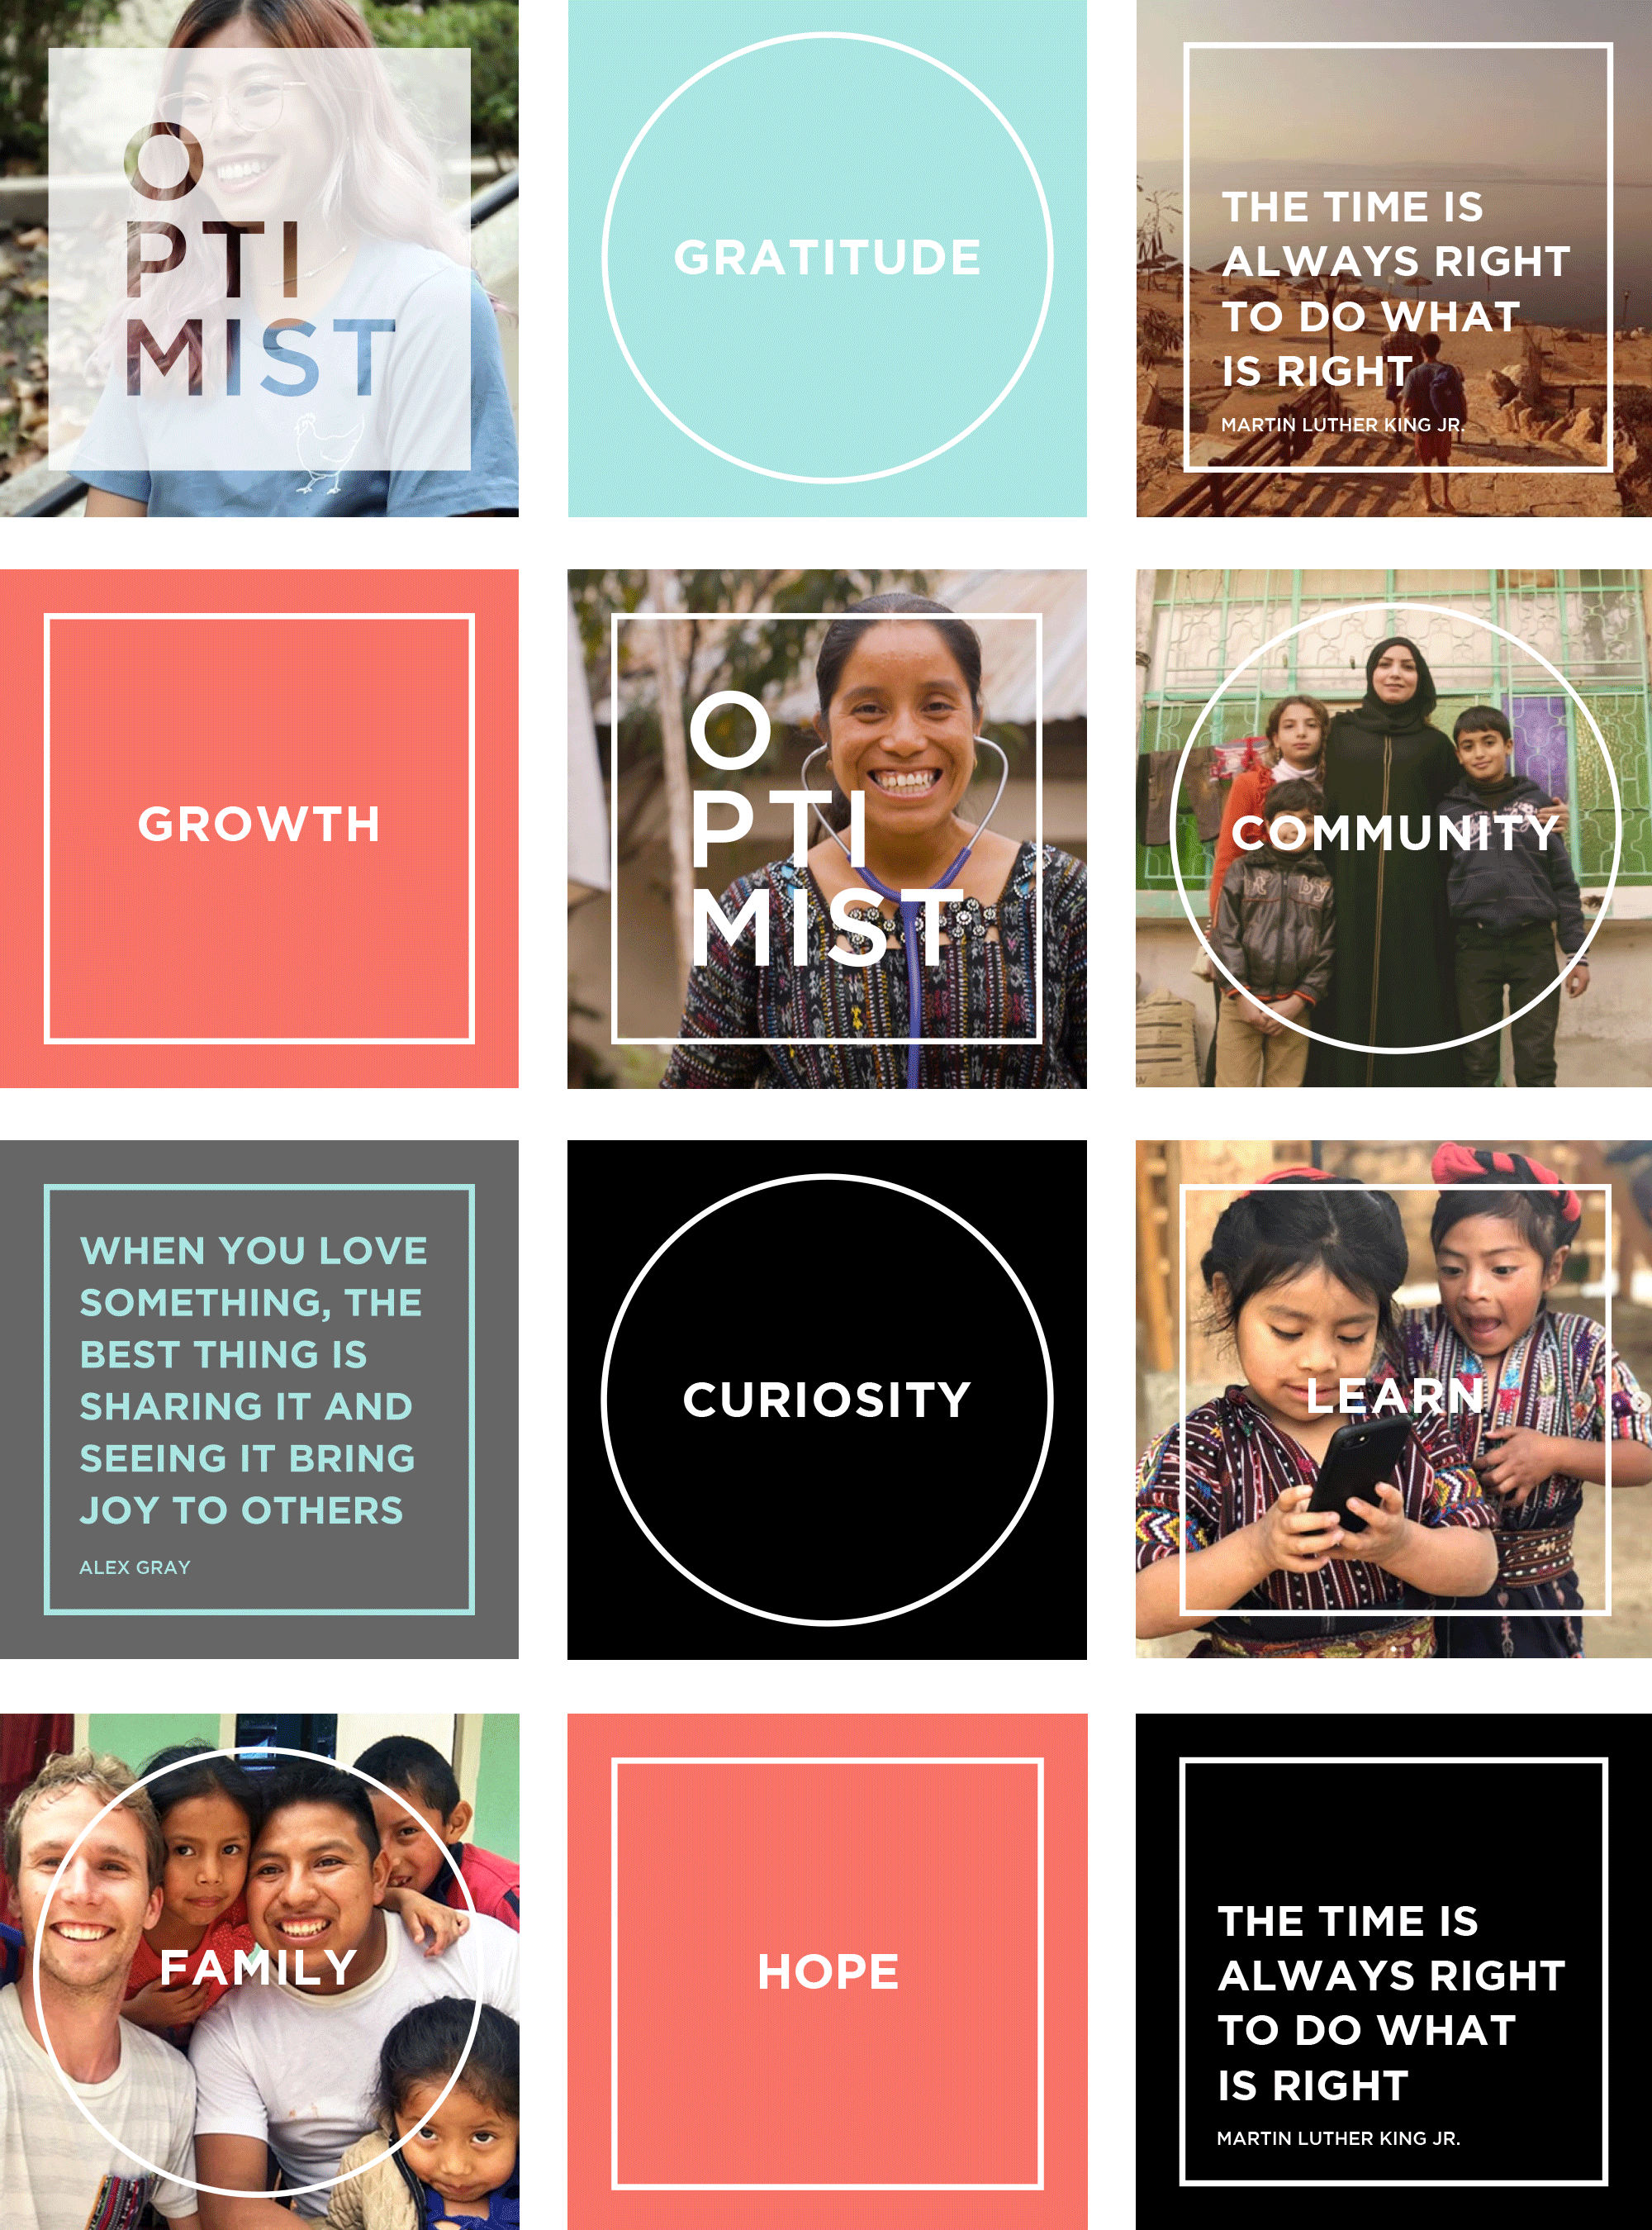 grid of 12 different square instagram post designs using brand colors black, light blue, orange and gray with inspirational quotes, the optimist logo and various imagery from their films